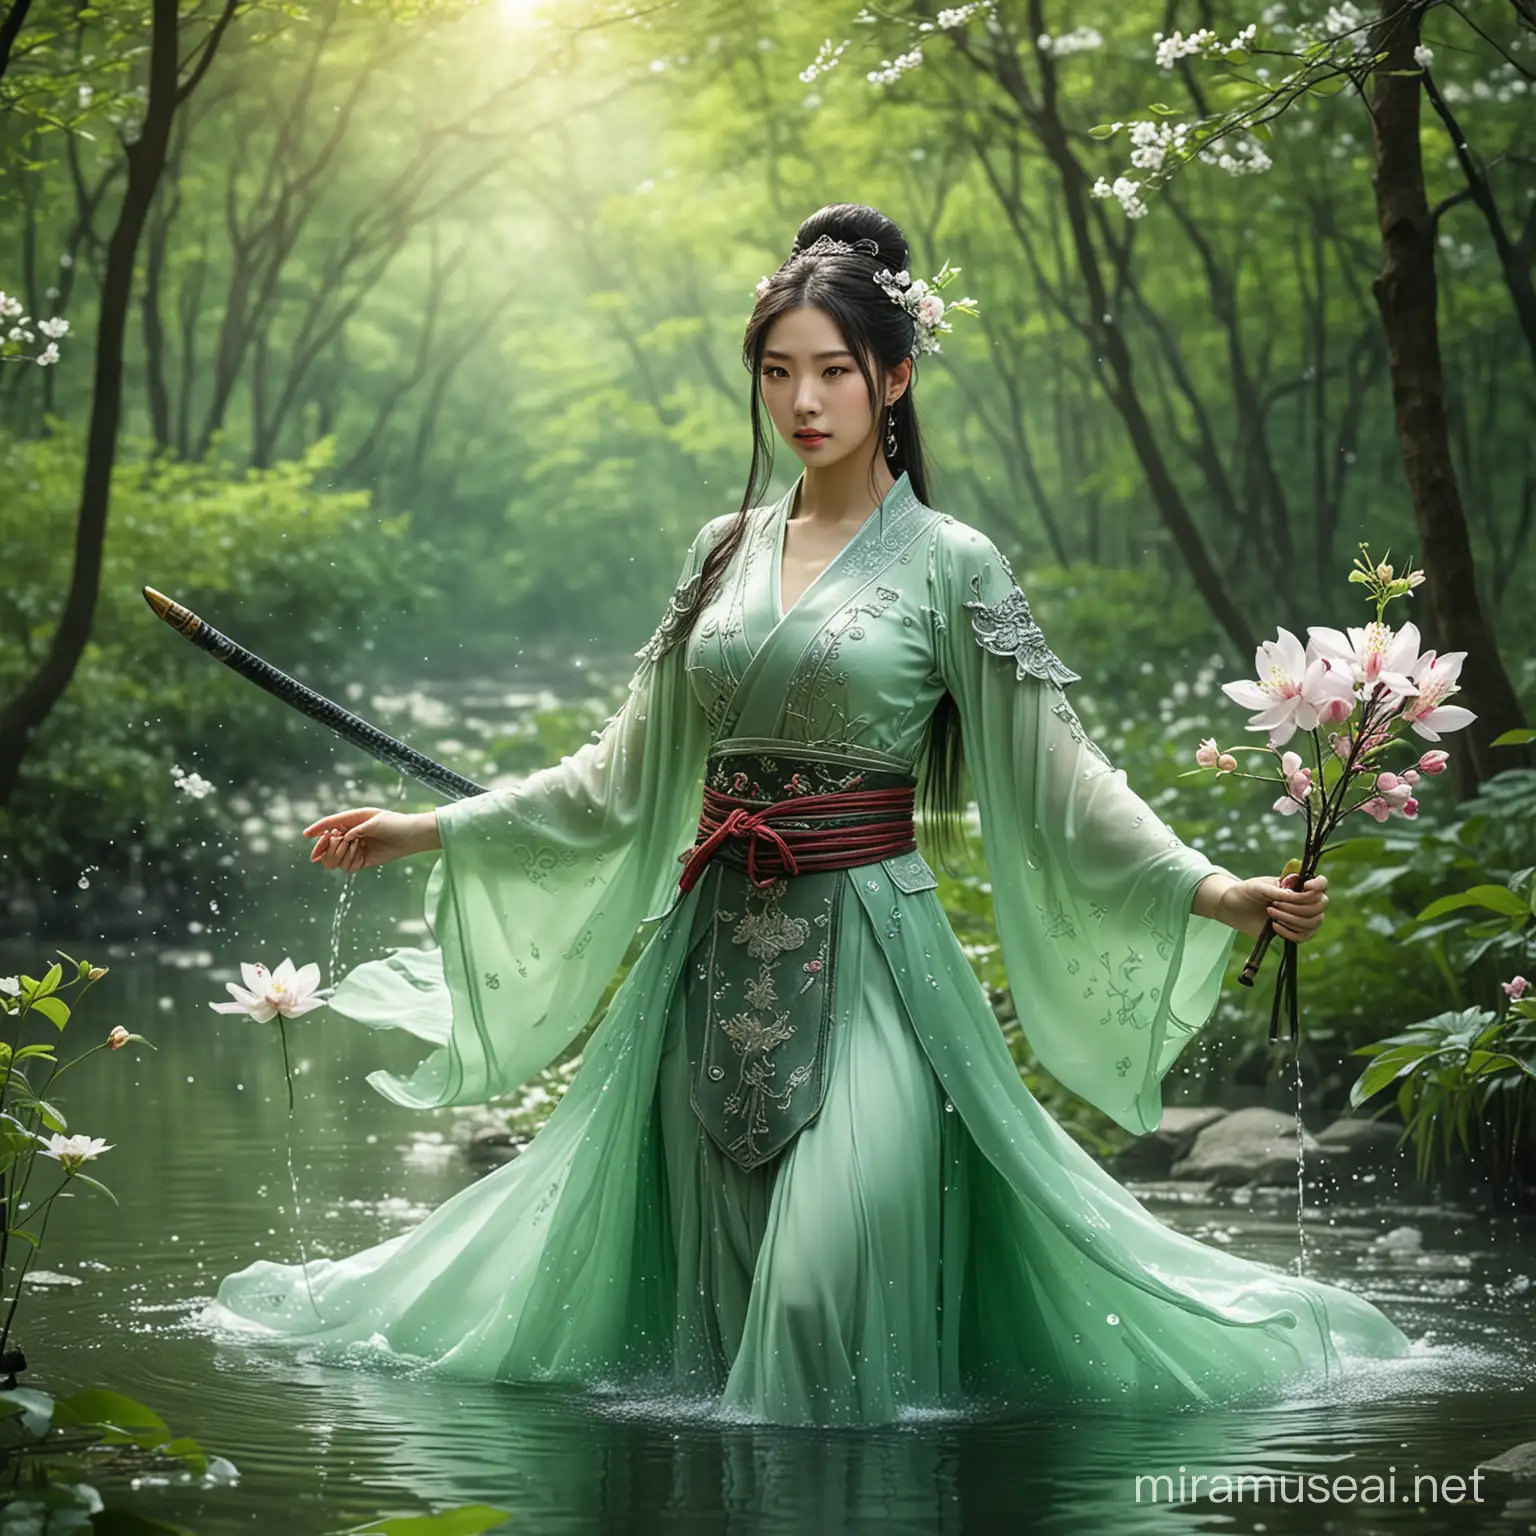 Enchanting Female China Warrior Amidst Blossoming Forest